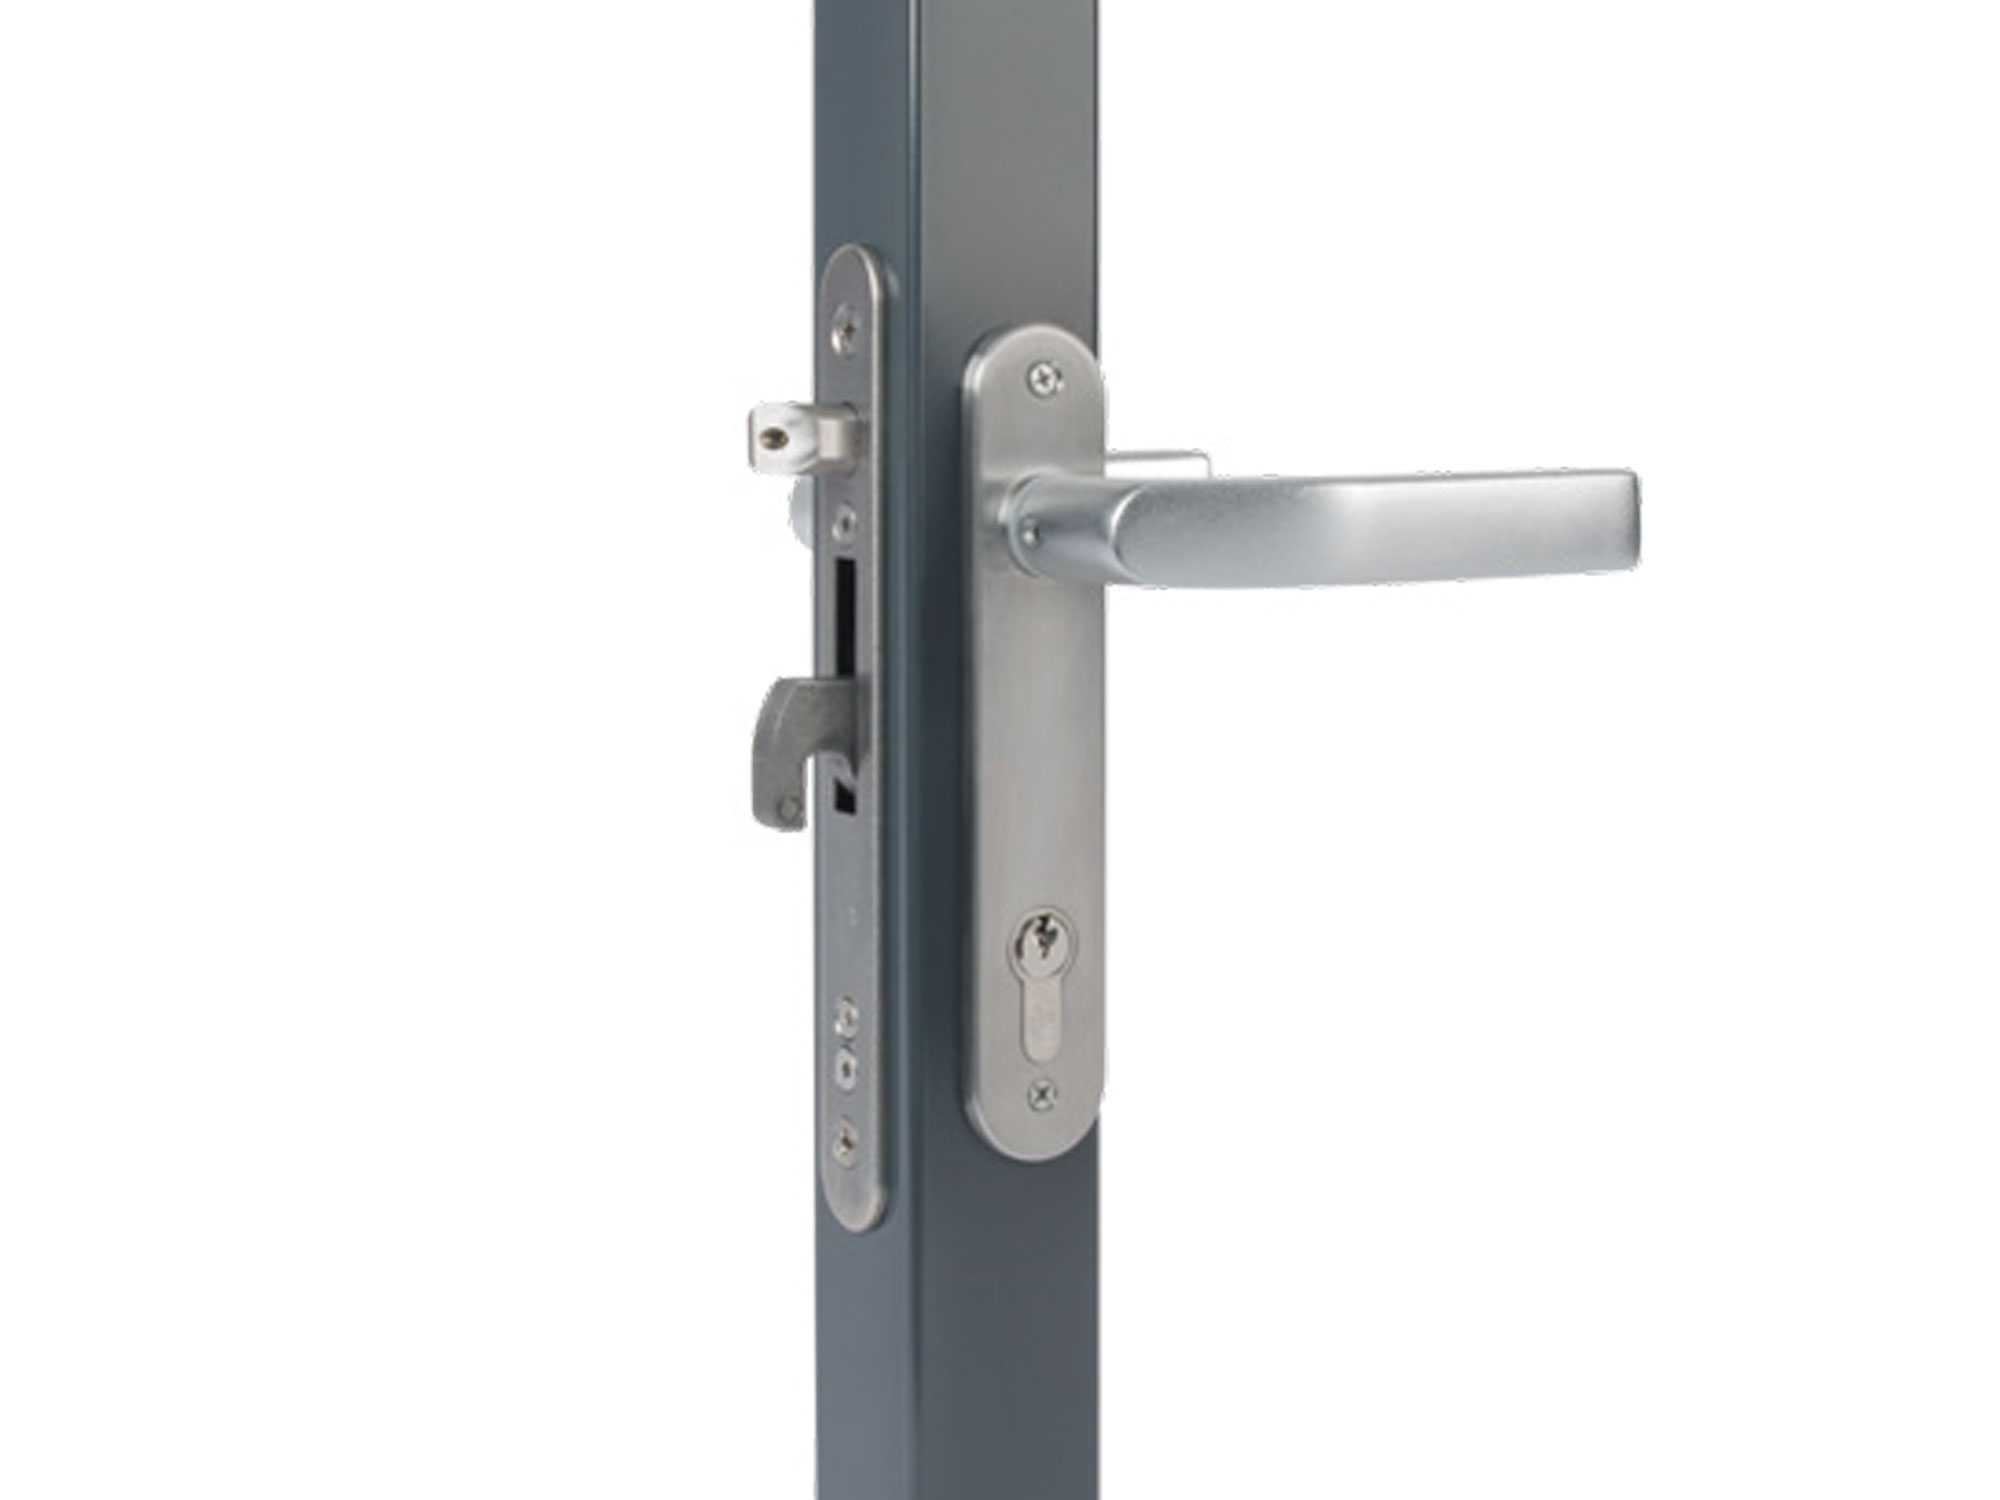 Locinox FIFTYLOCK - Mortised lock with 30 mm (1-3/16”) Backset